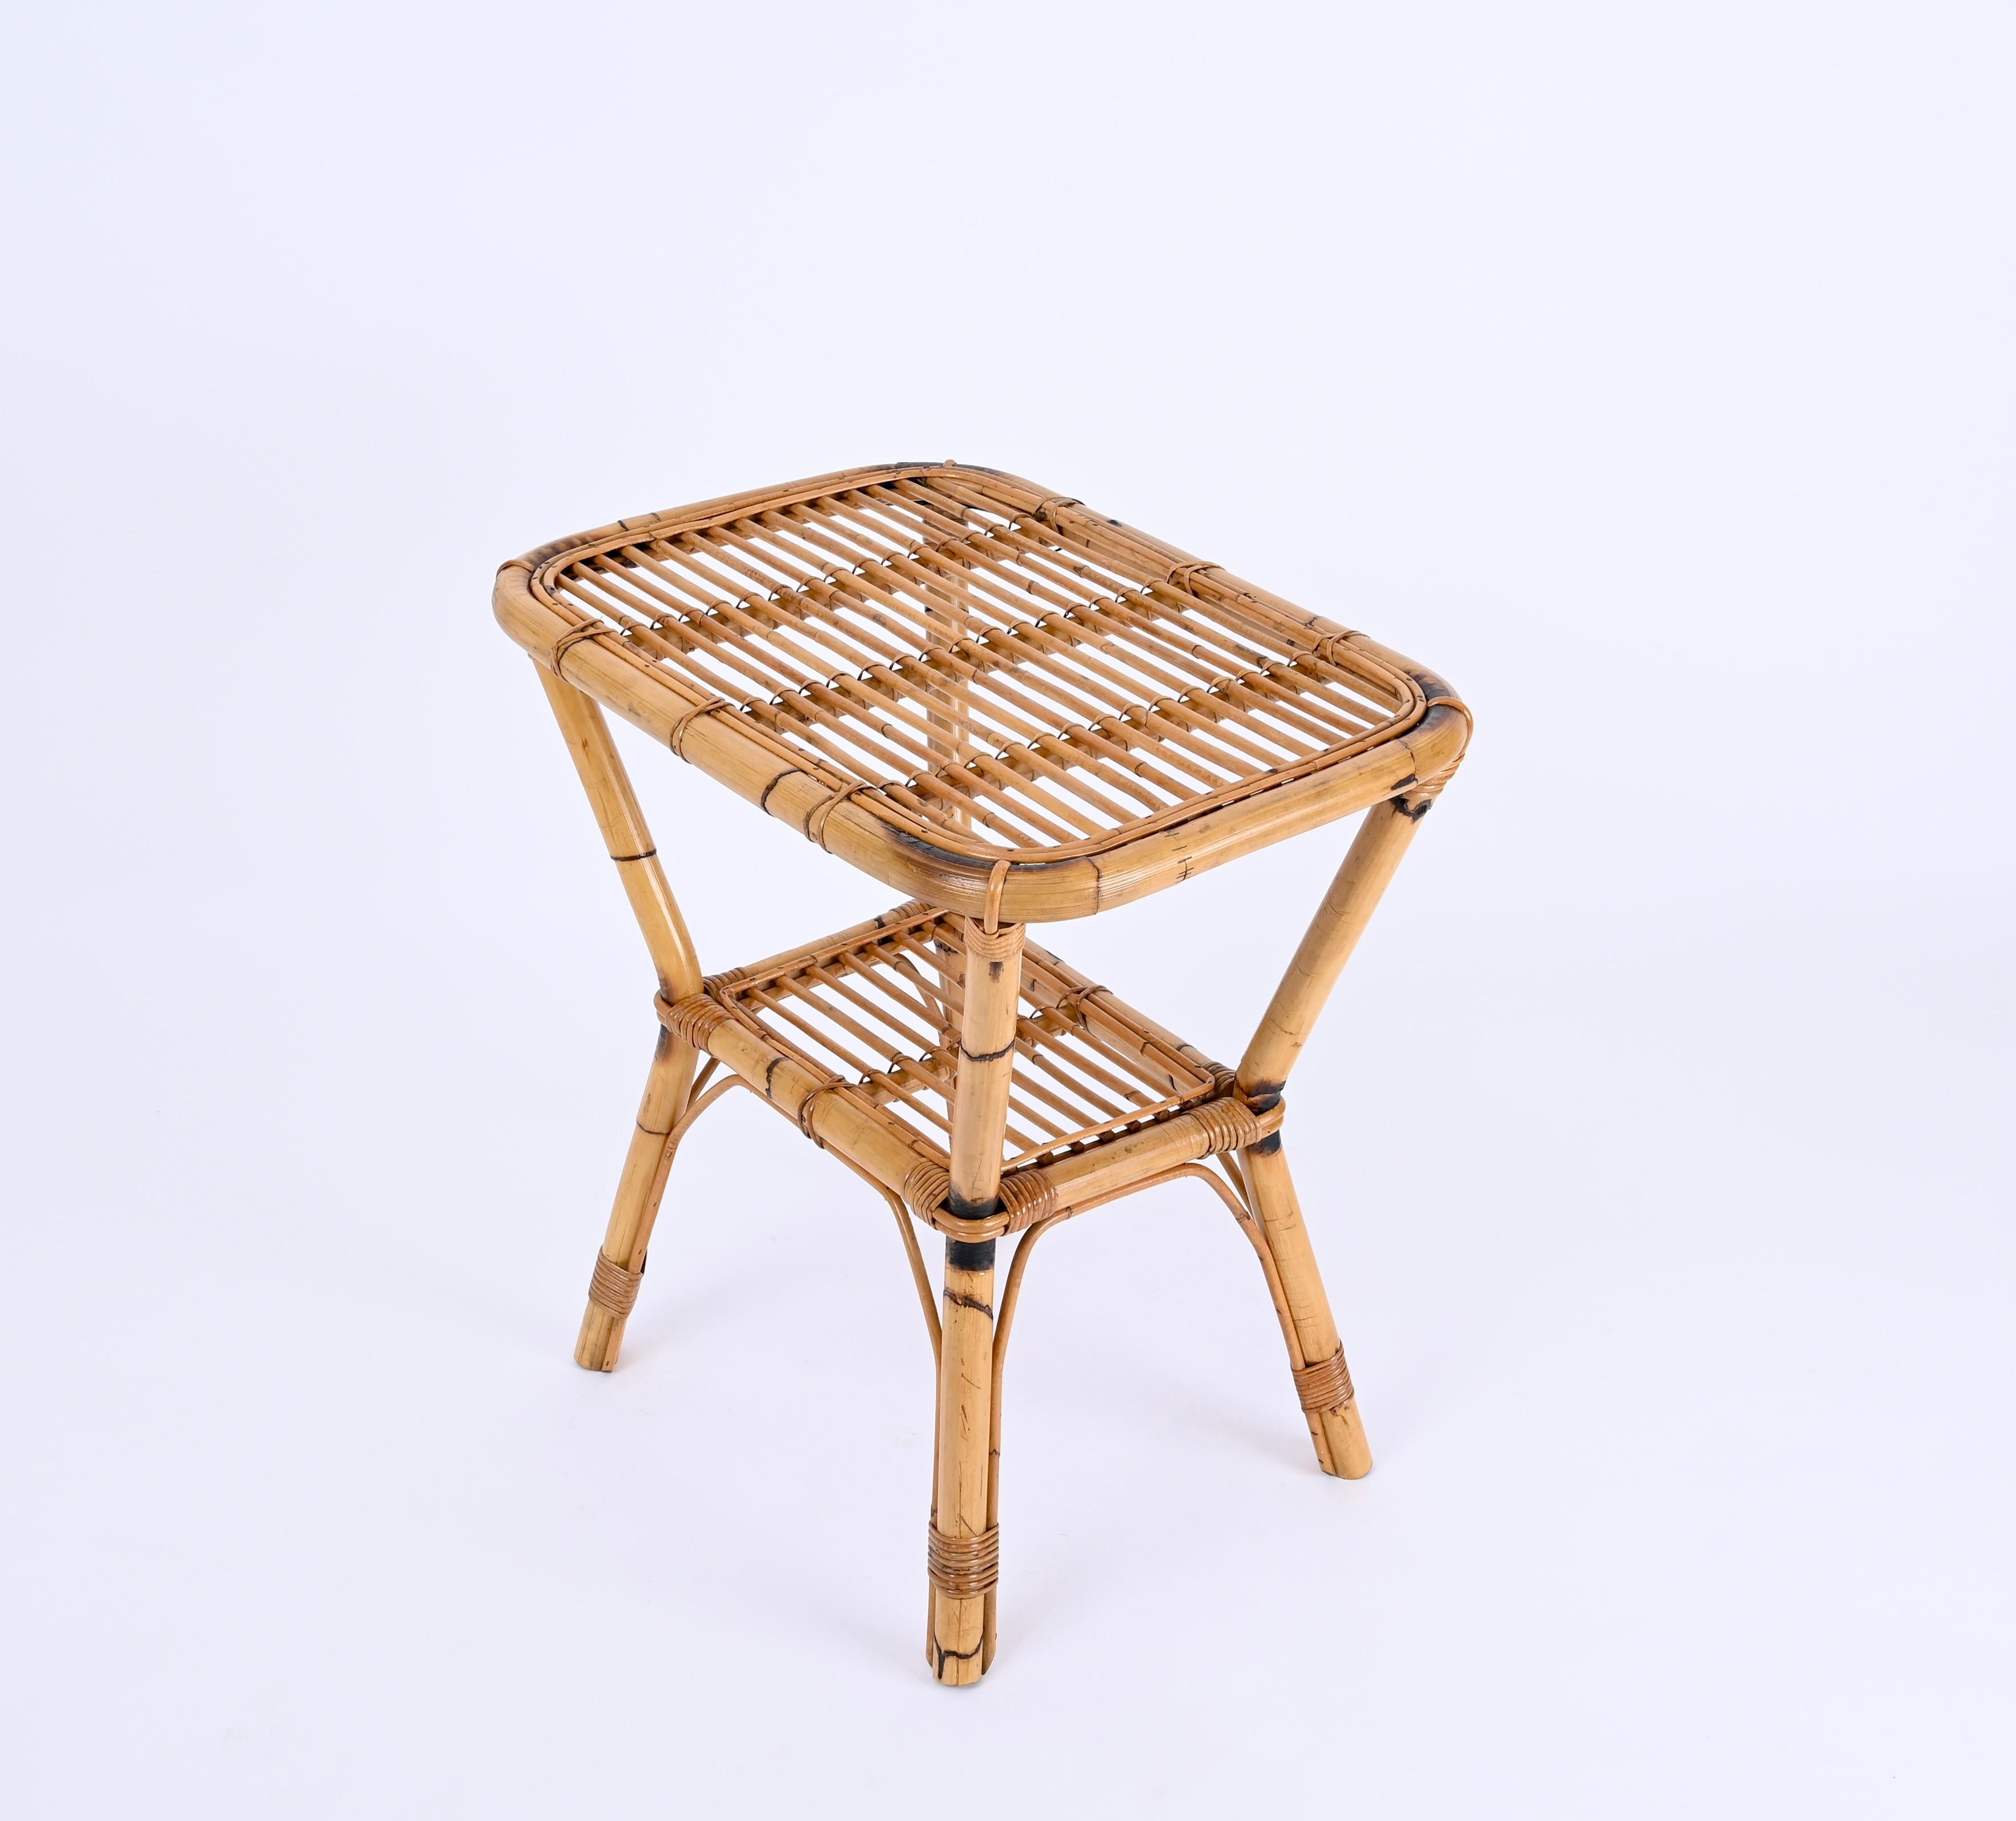 Italian French Riviera Side or Coffee Table in Rattan, Bamboo and Wicker, Italy 1960s For Sale